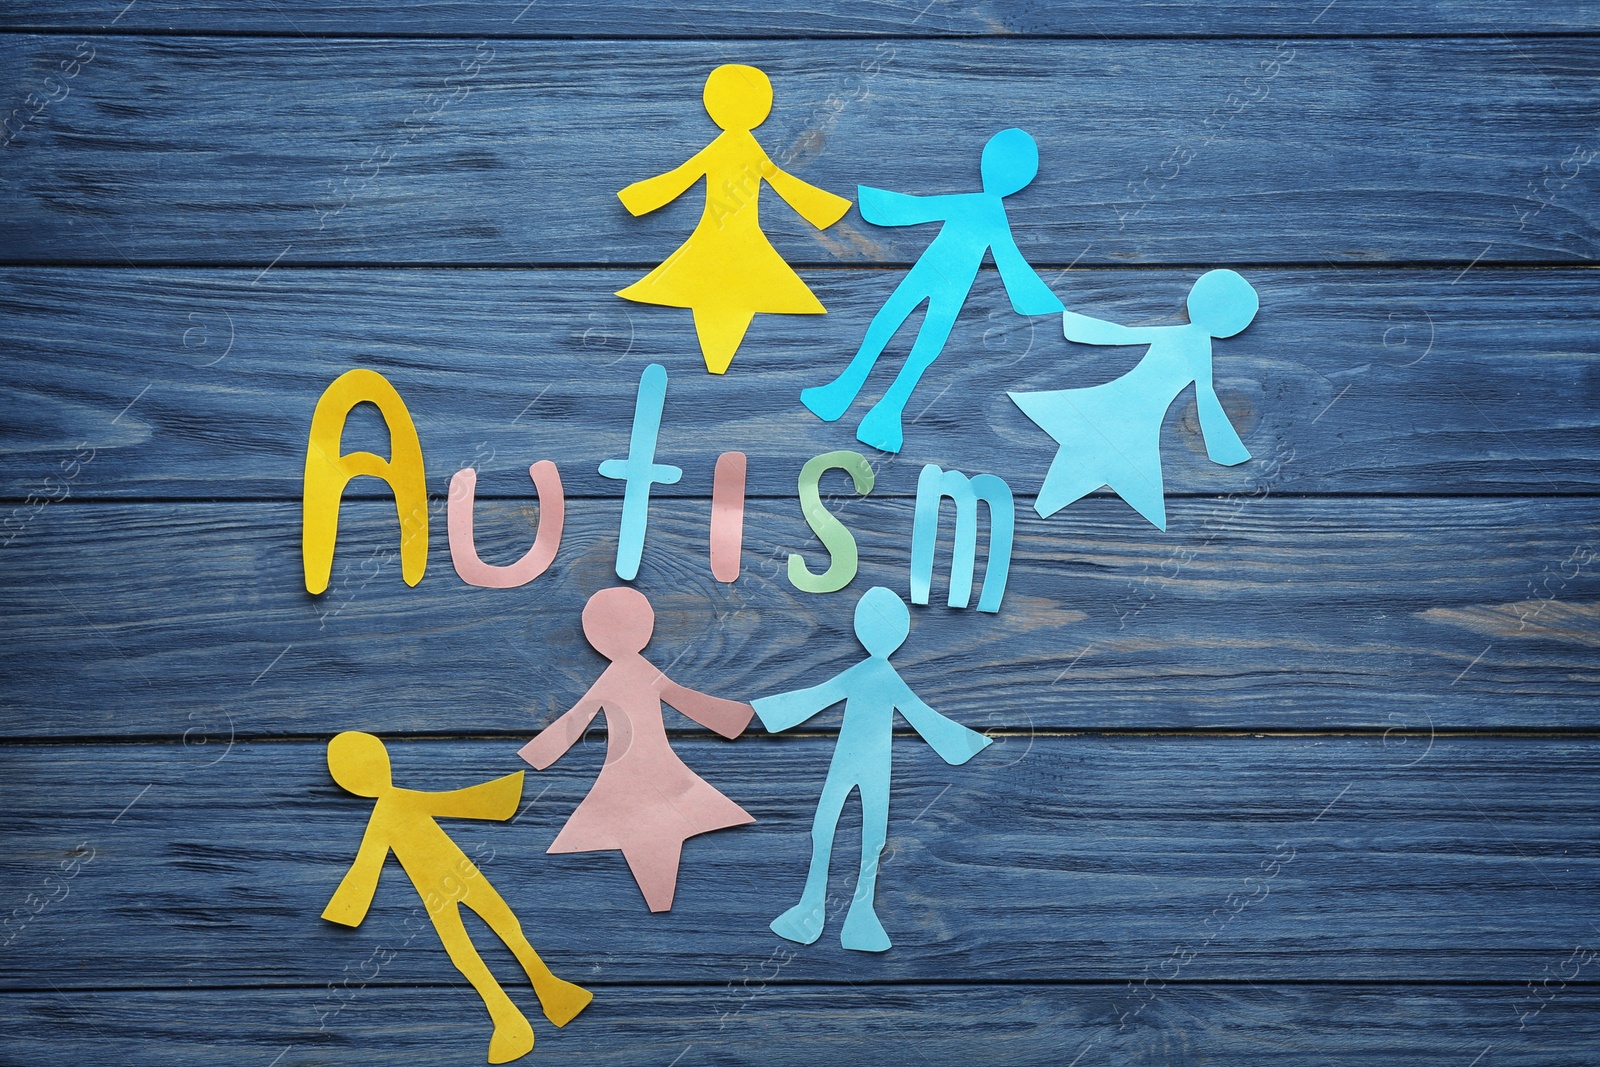 Photo of Word "Autism" and paper figures on wooden background